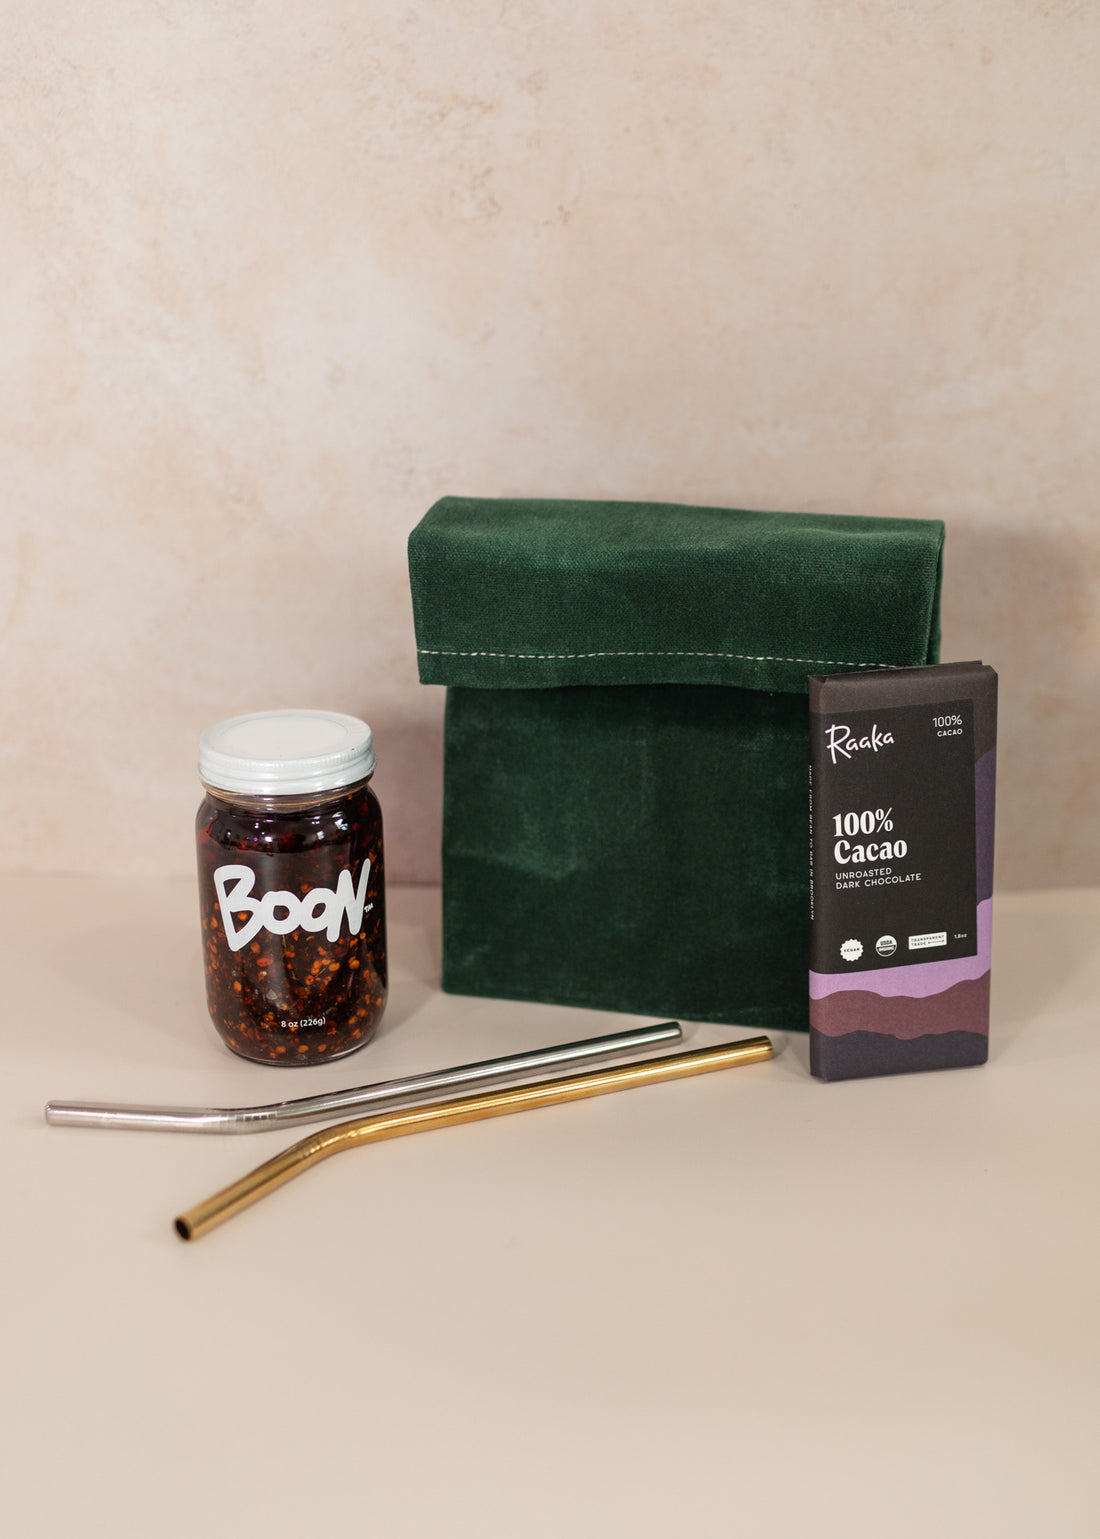 Emerald Eco-Friendly Lunch Bag With Boon Sauce, Raaka Chocolate and Two Reusable Straws laying in front